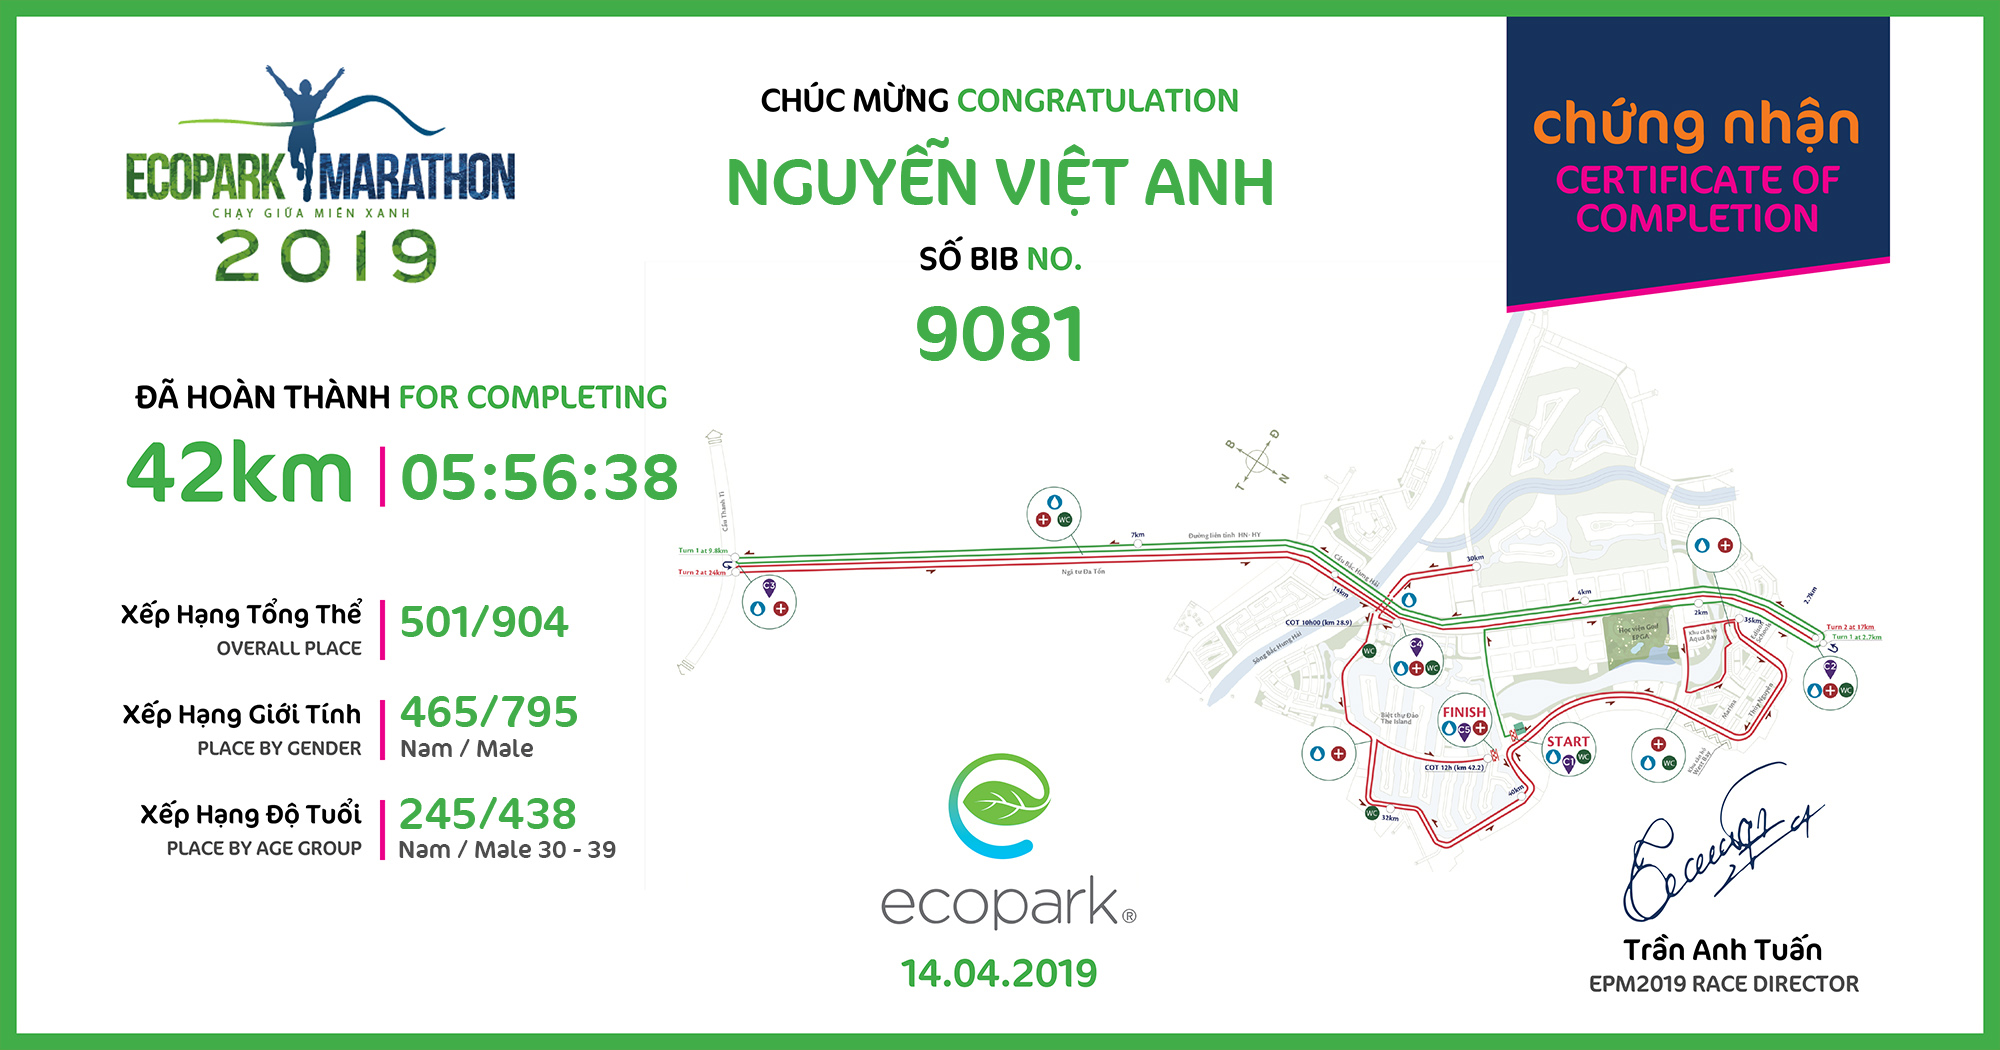 9081 - Nguyễn Việt Anh